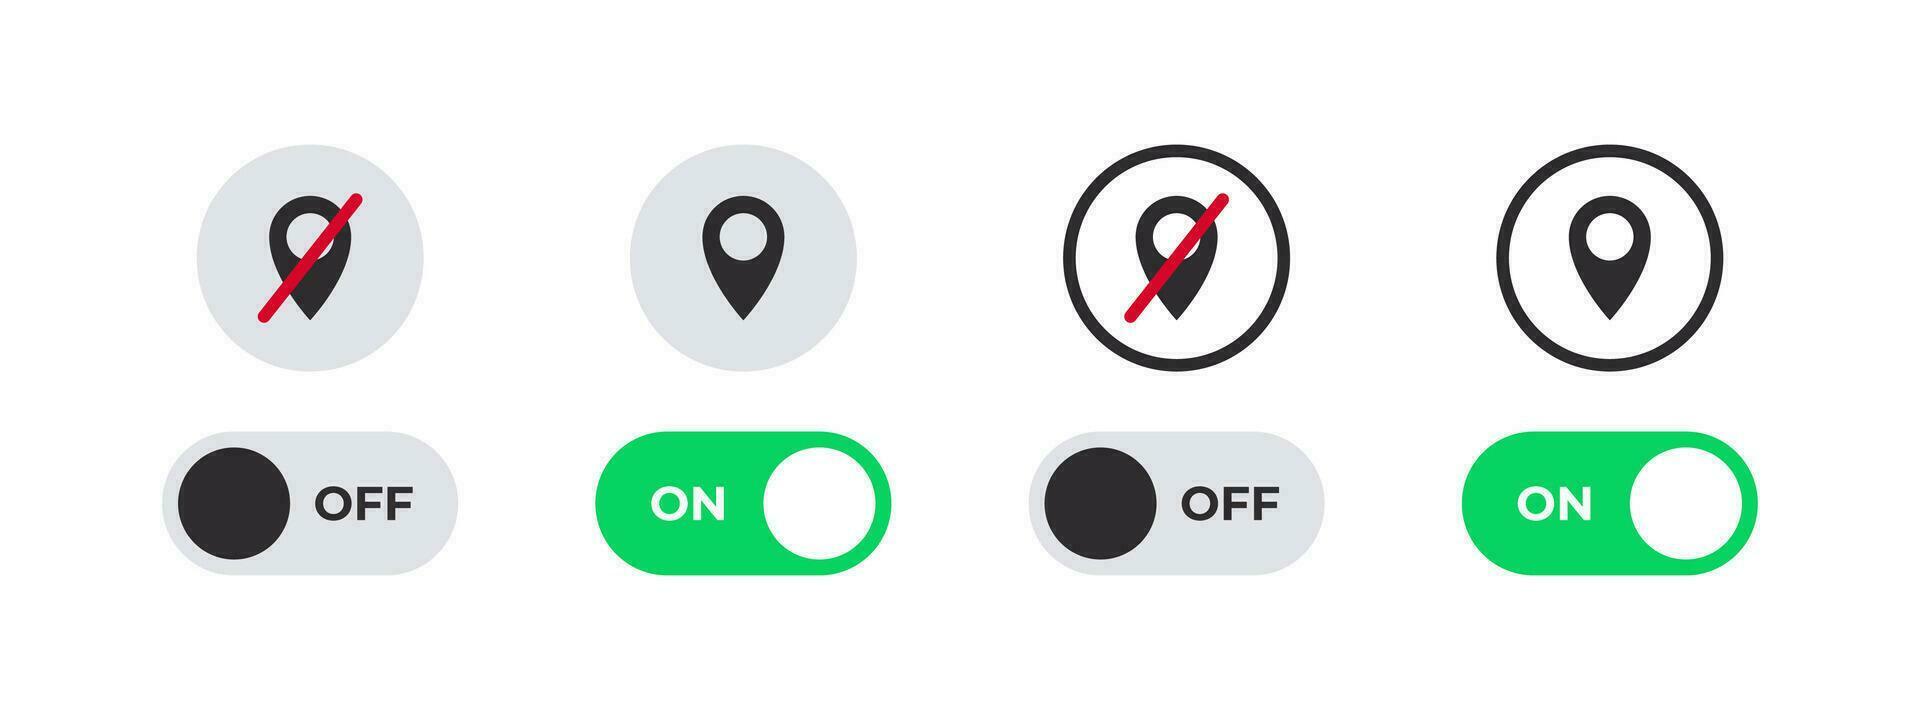 On and Off switch icons. Enable or disable geolocation. Vector scalable graphics